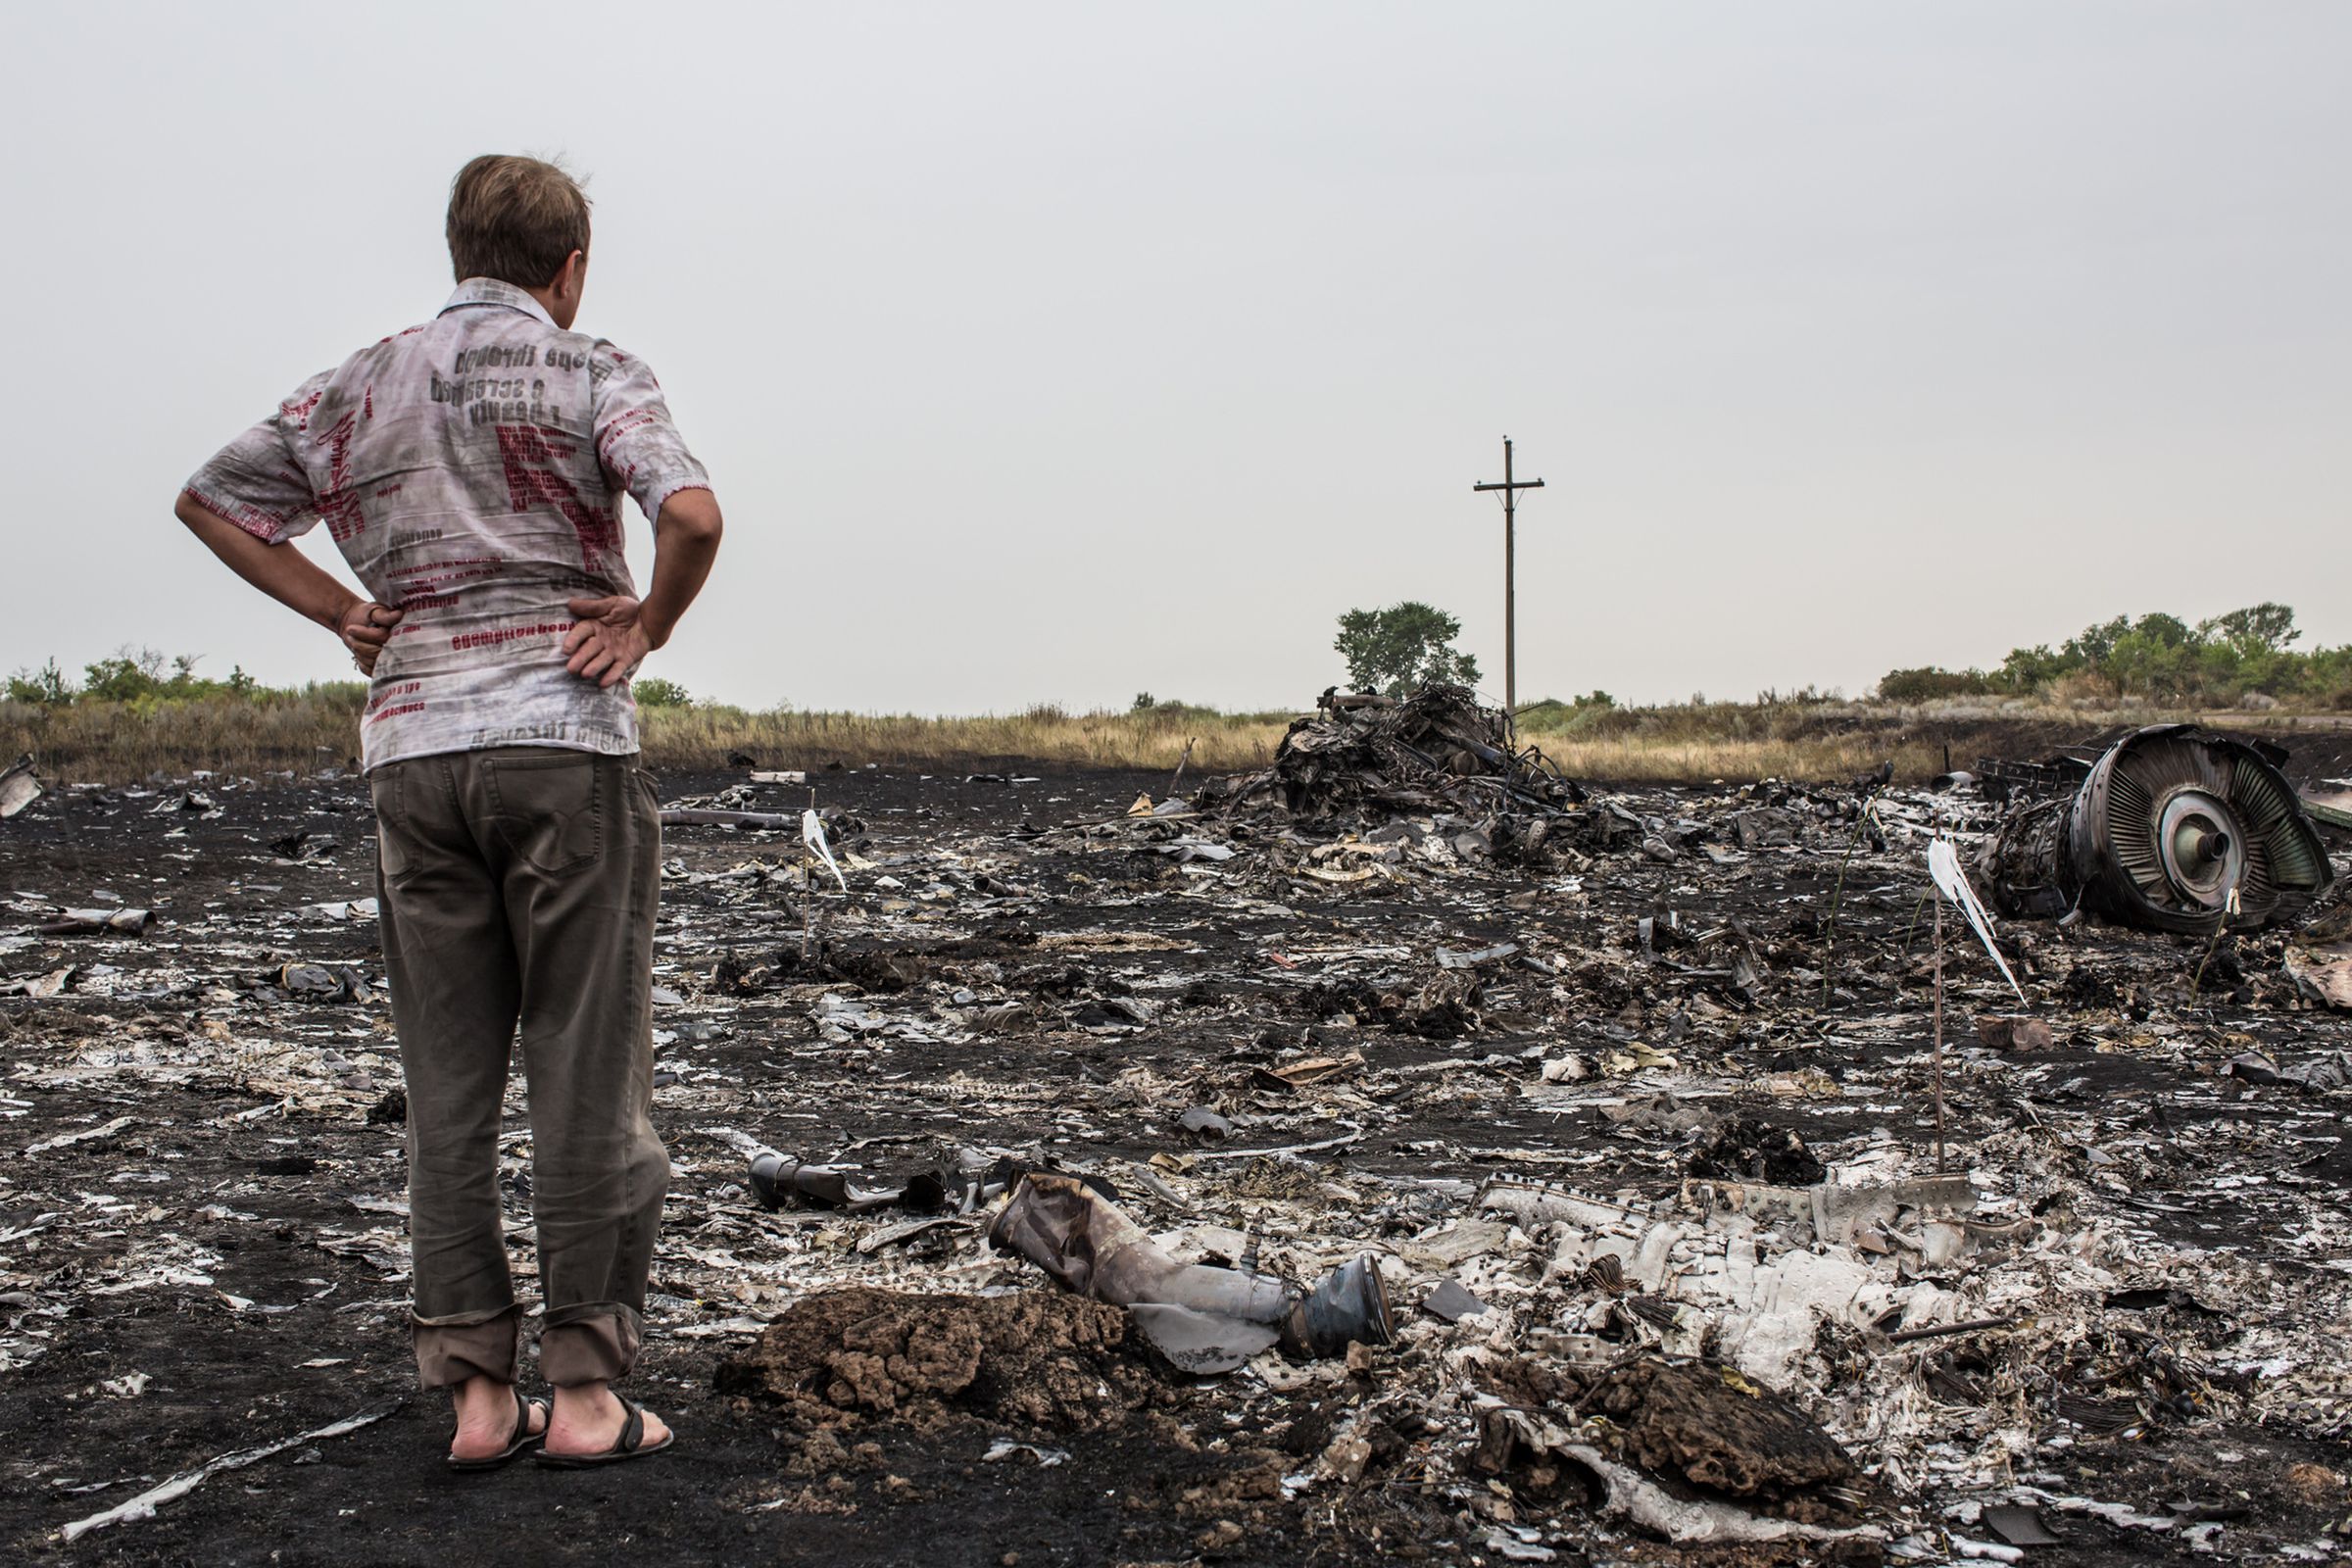 A man stares at the wreckage of Malaysian Airlines flight MH17 near Donestk, Ukraine.